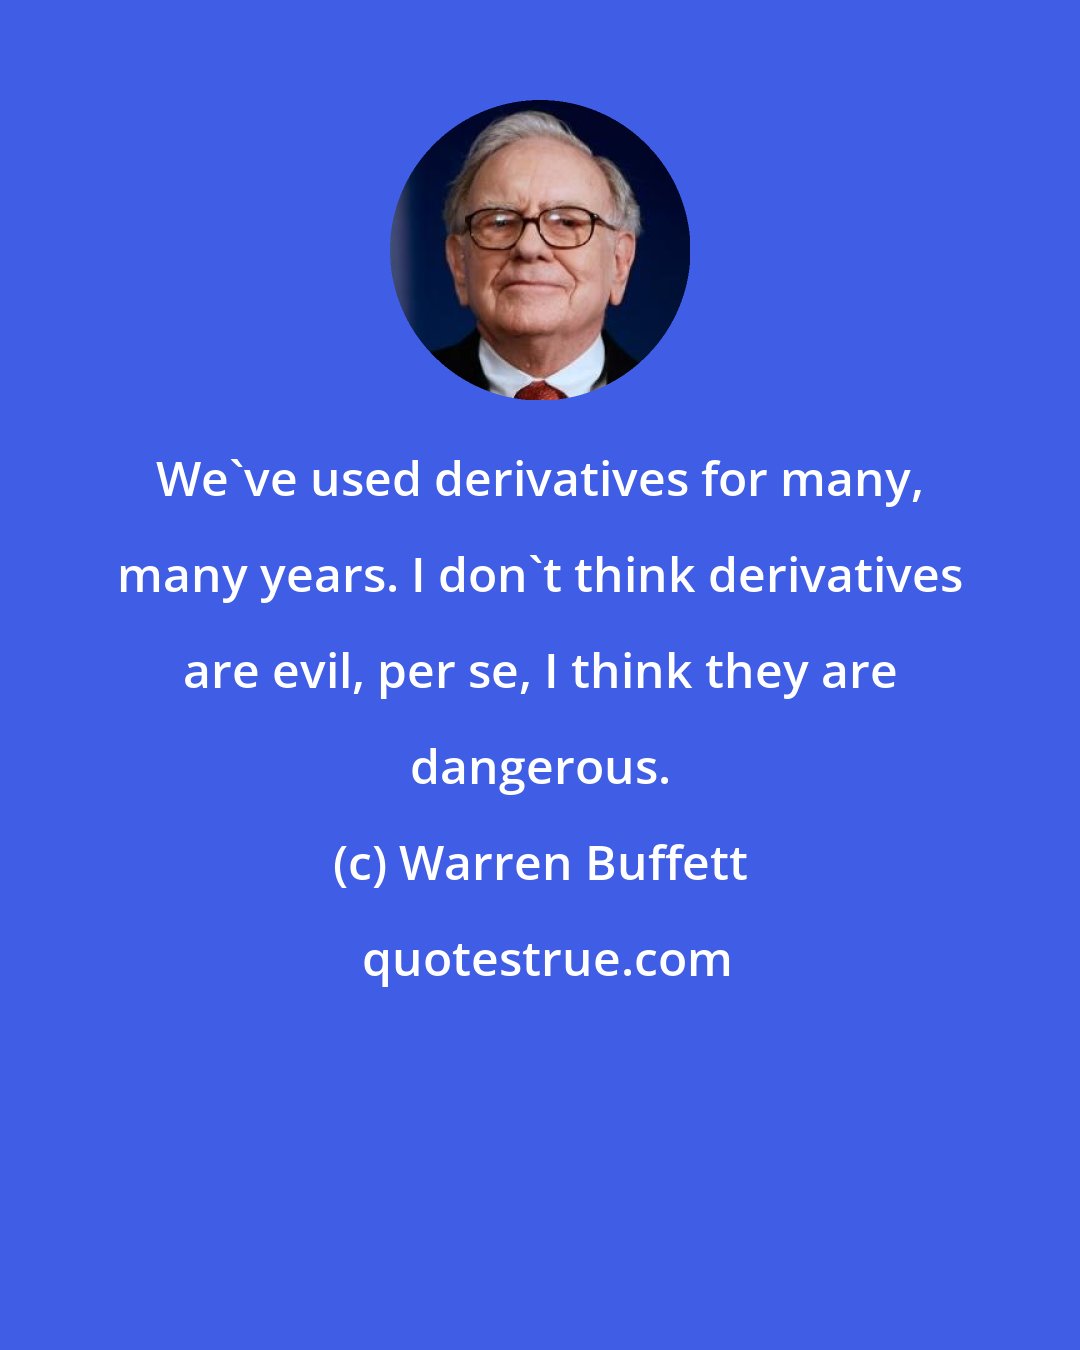 Warren Buffett: We've used derivatives for many, many years. I don't think derivatives are evil, per se, I think they are dangerous.